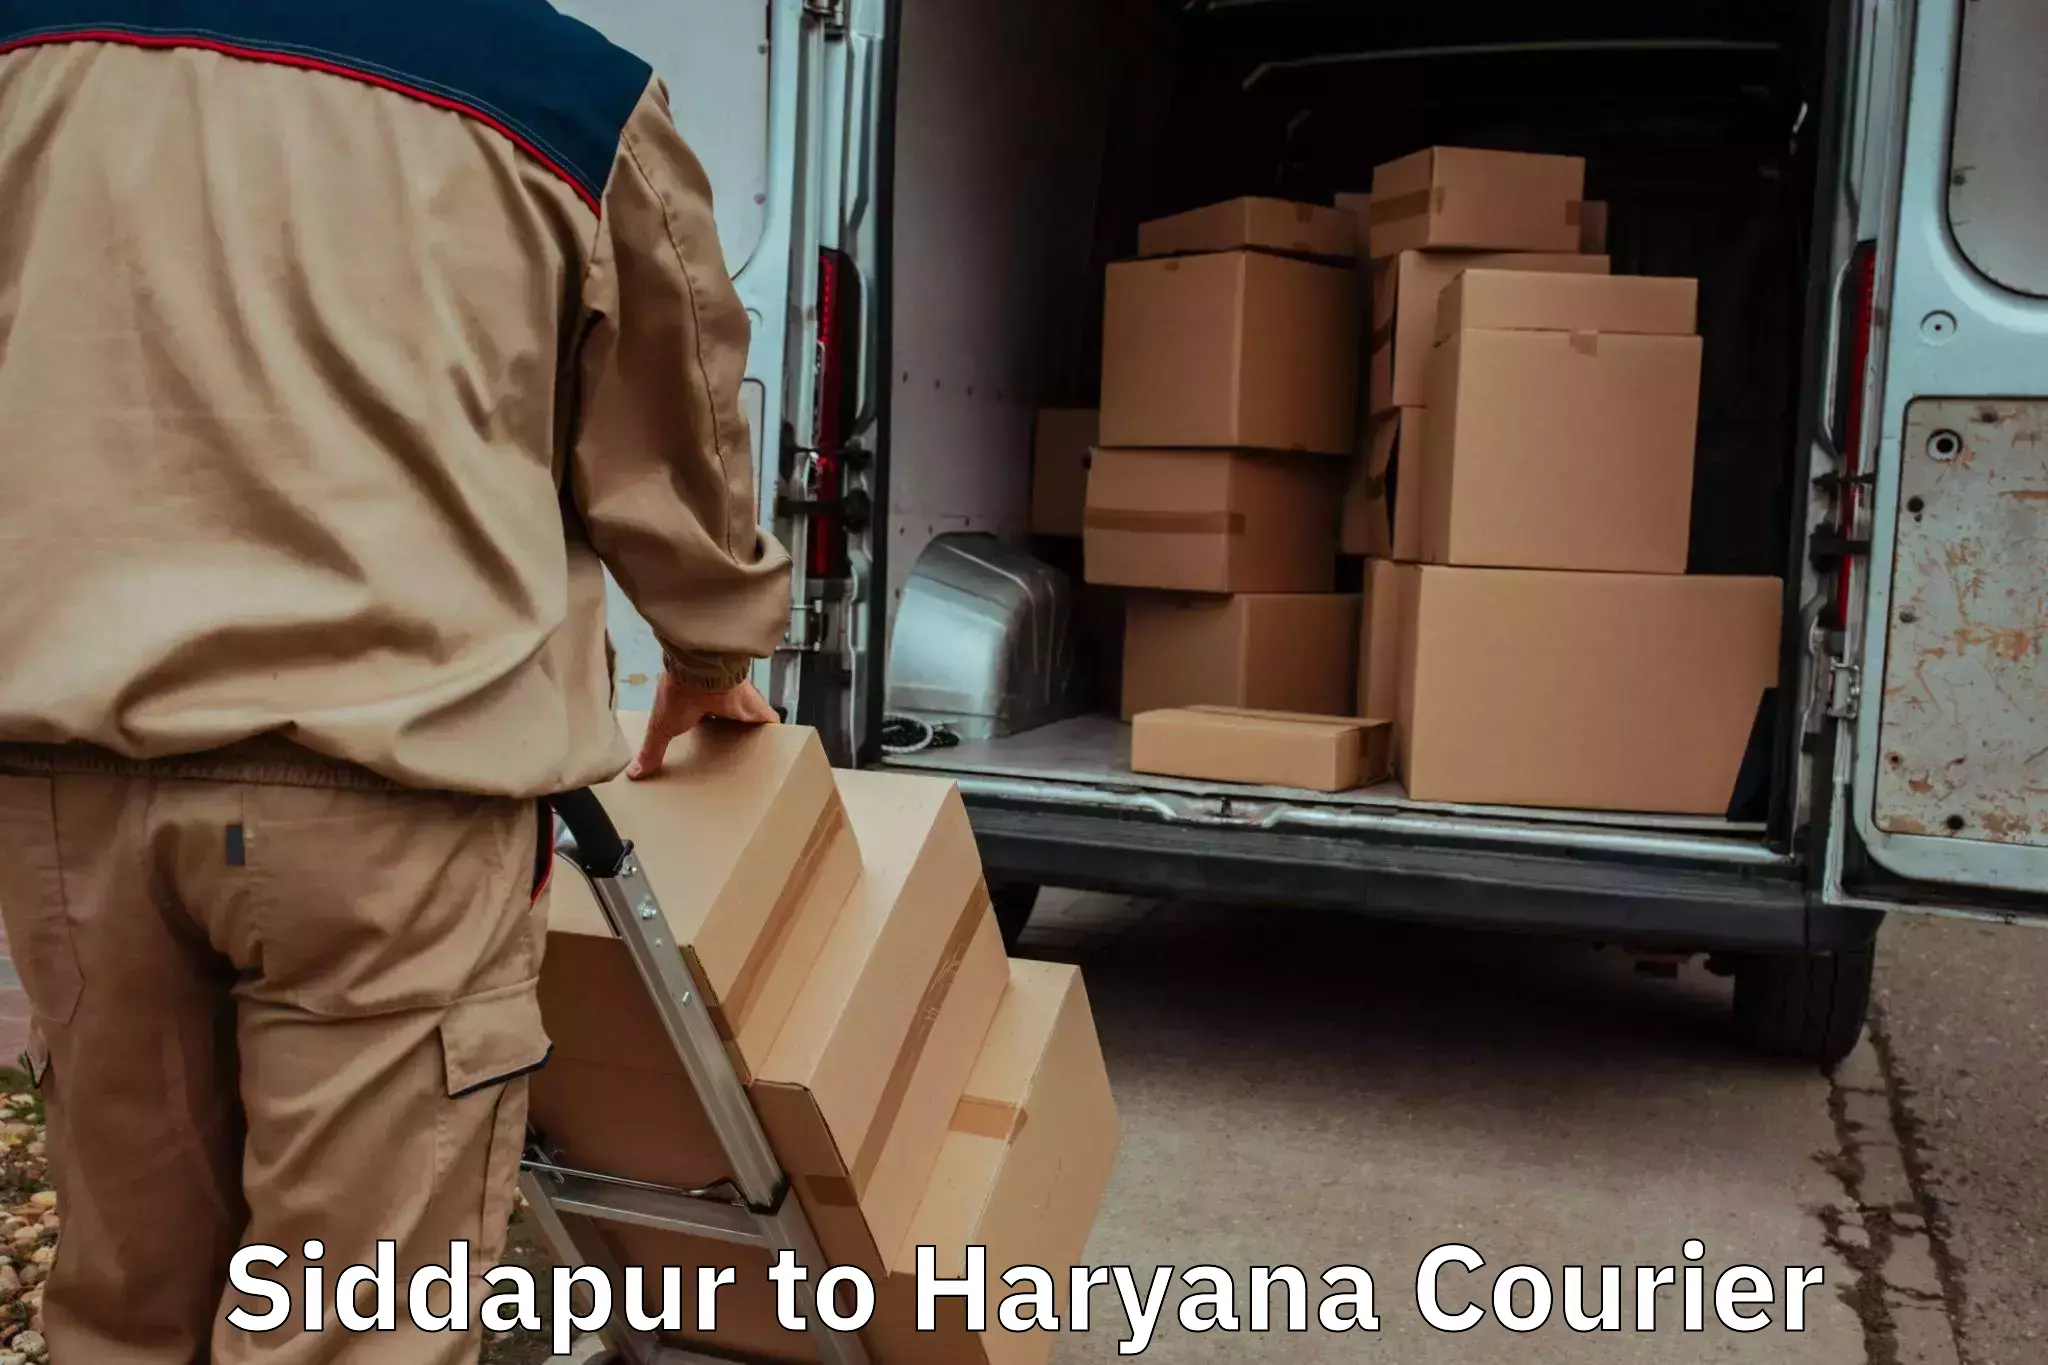 Furniture transport professionals Siddapur to Palwal